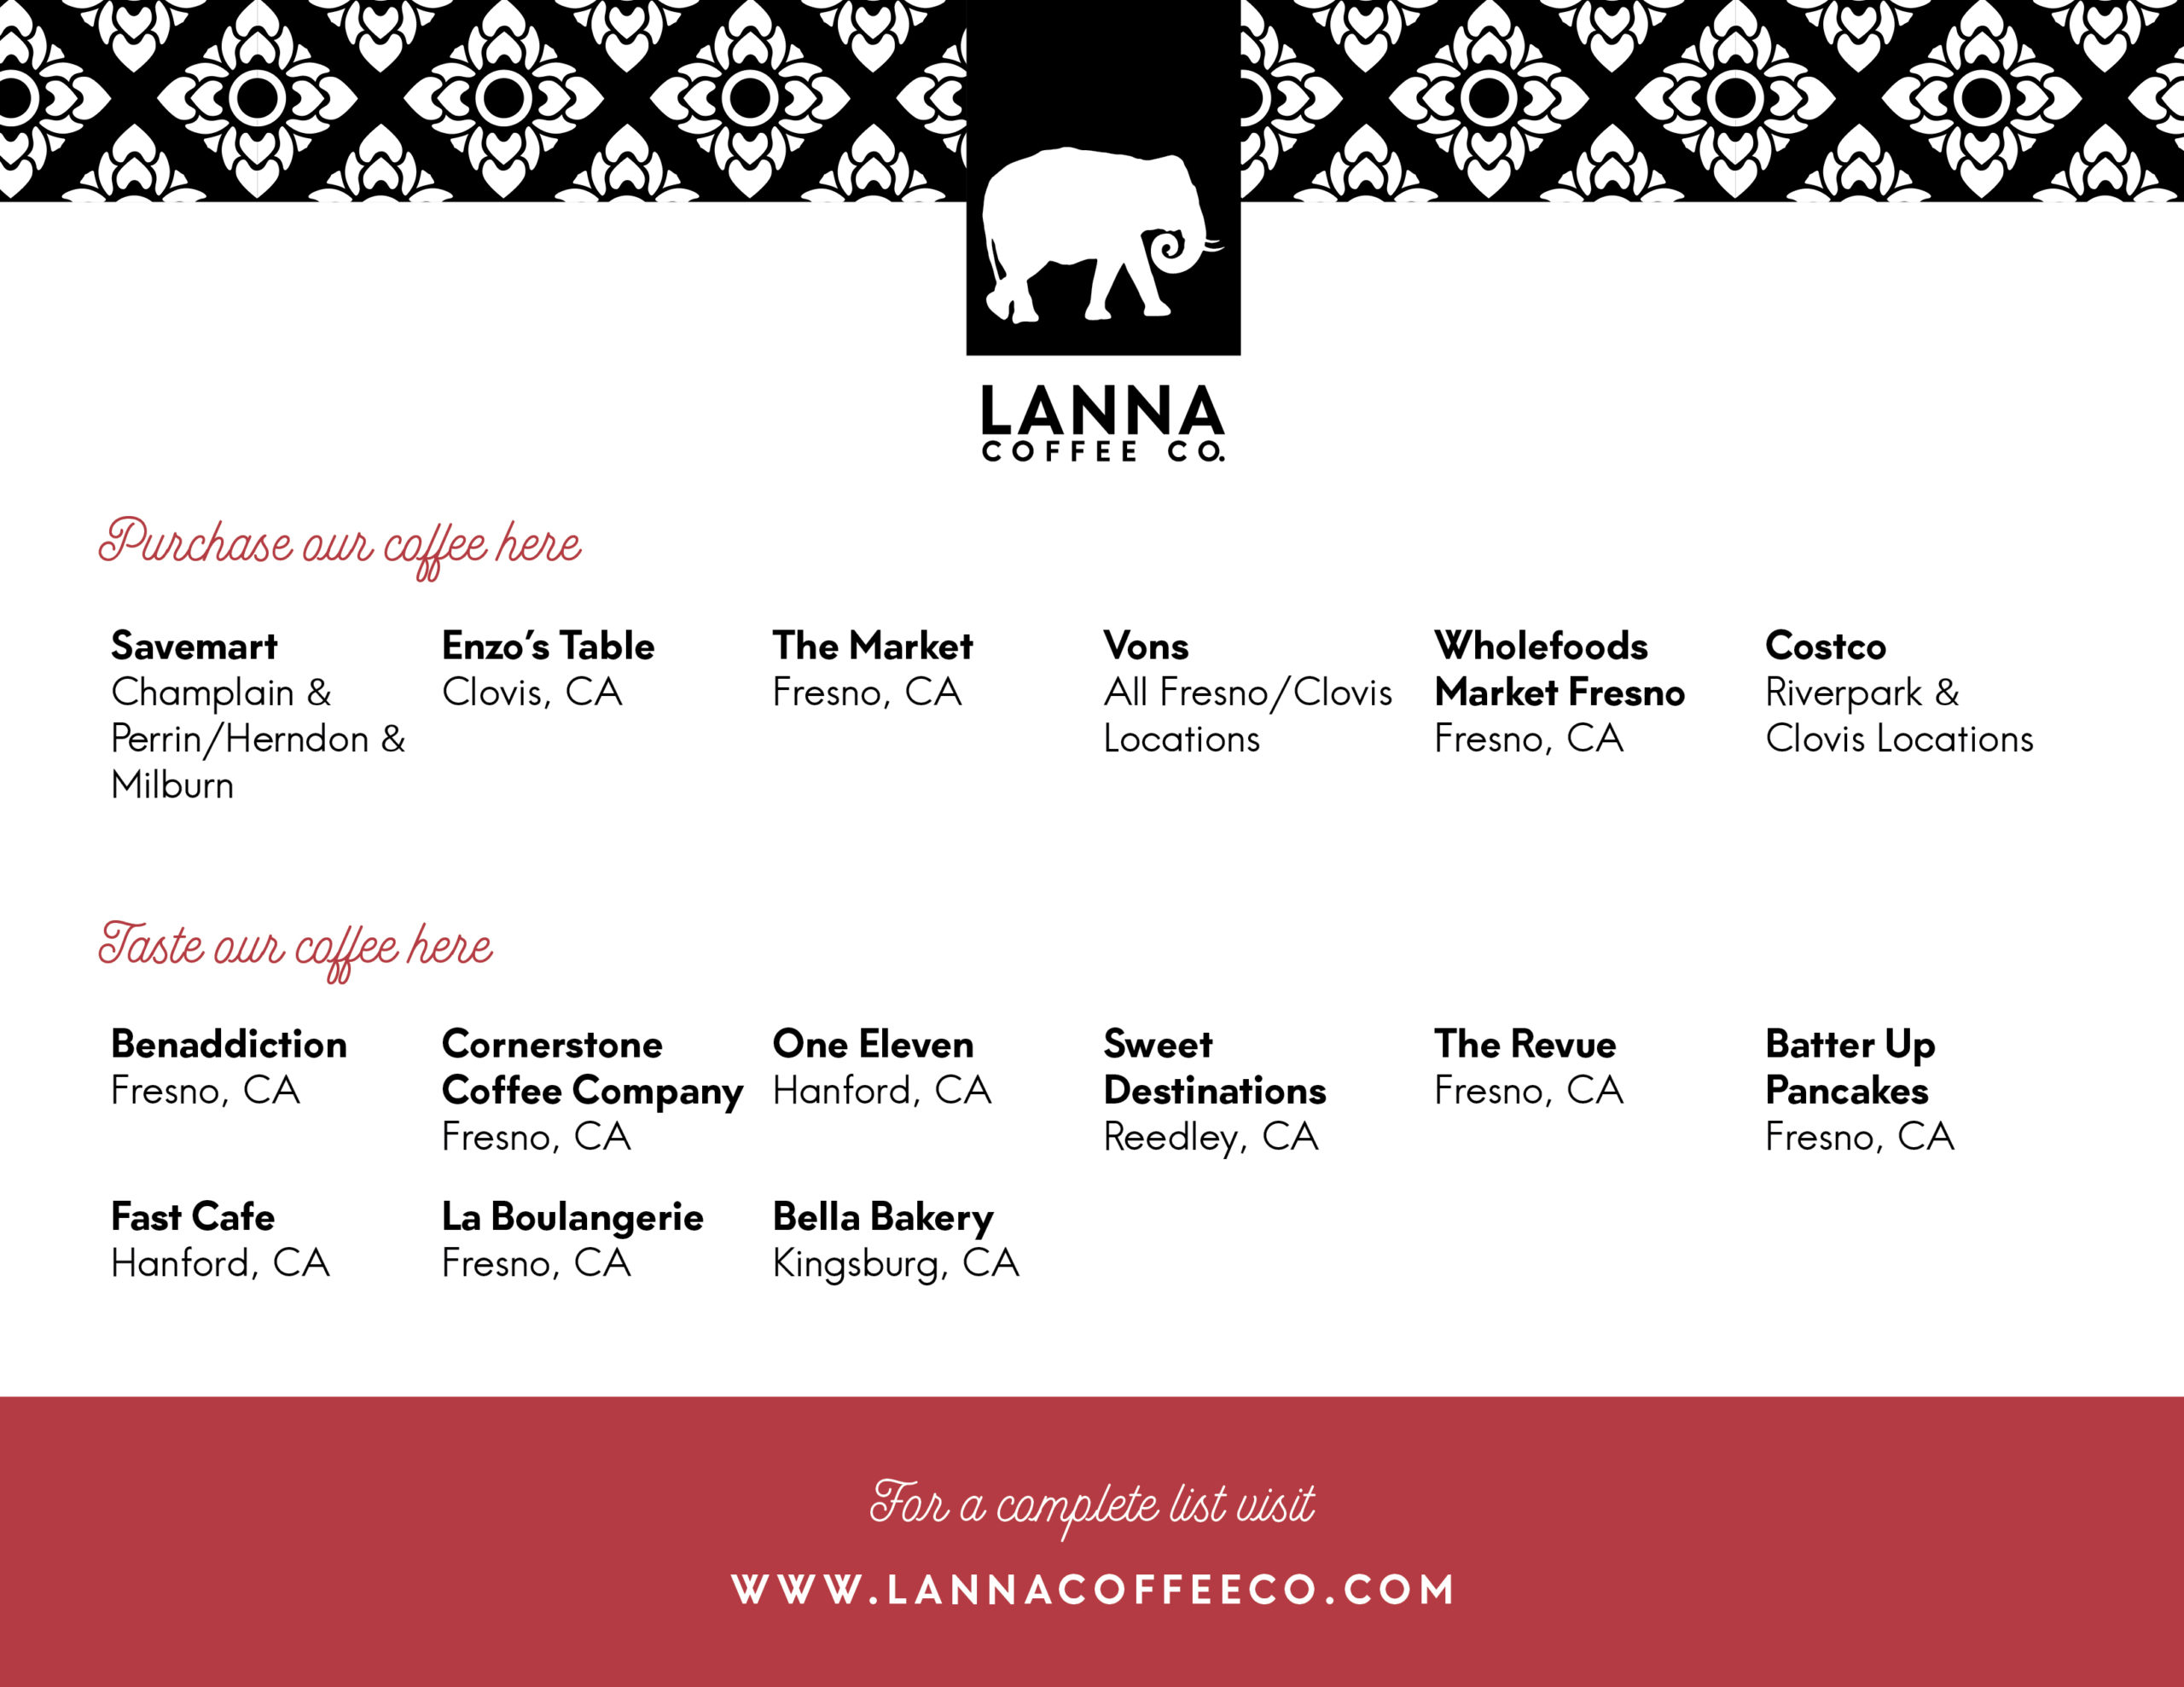 Lanna Coffee Co. store signage with locations to purchase and taste coffee.